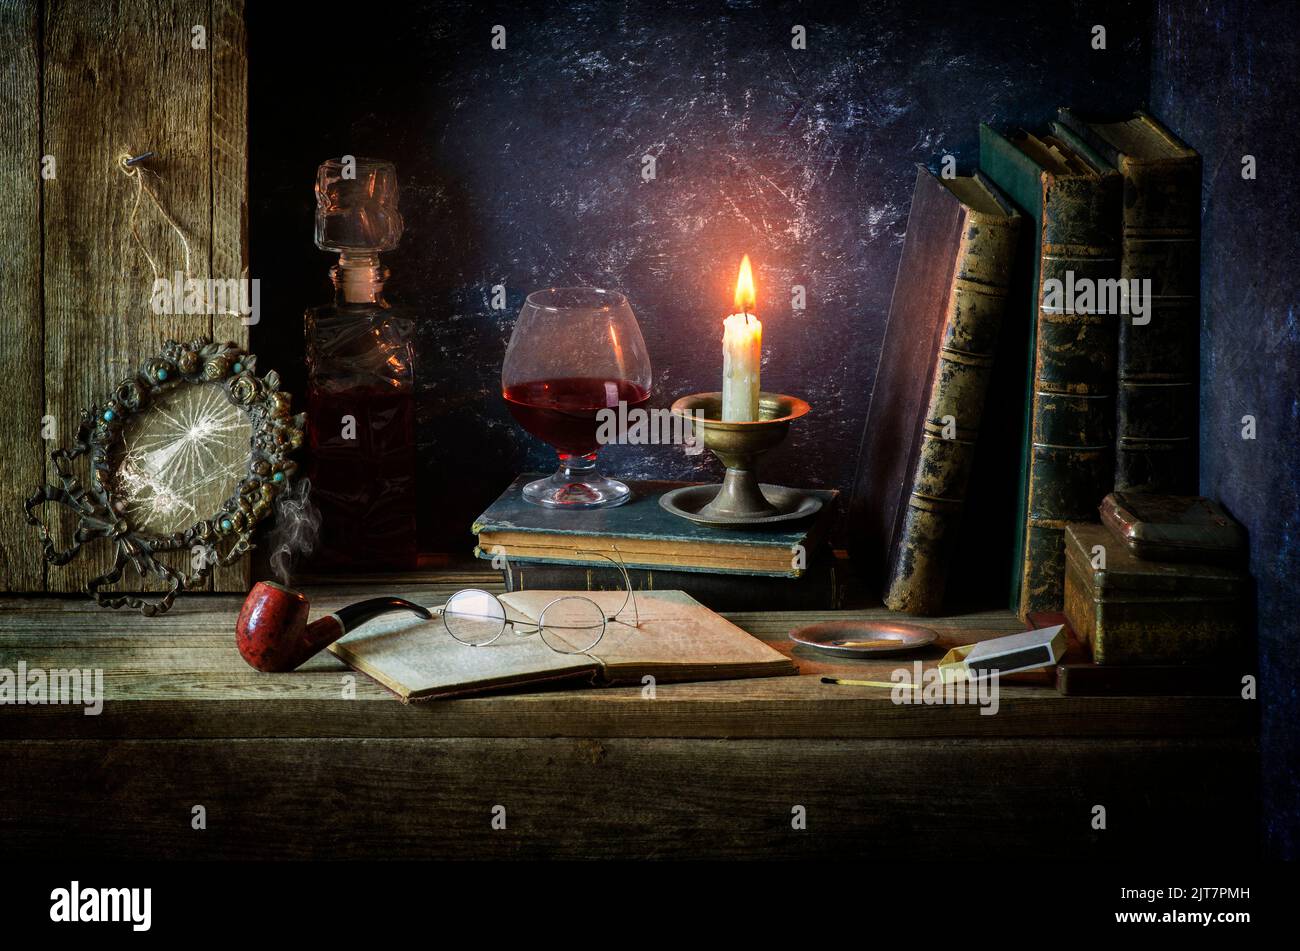 https://c8.alamy.com/comp/2JT7PMH/classic-still-life-with-vintage-books-placed-with-old-boxes-broken-frame-pipe-antique-glasses-illuminated-candle-bottle-and-glass-of-red-wine-2JT7PMH.jpg